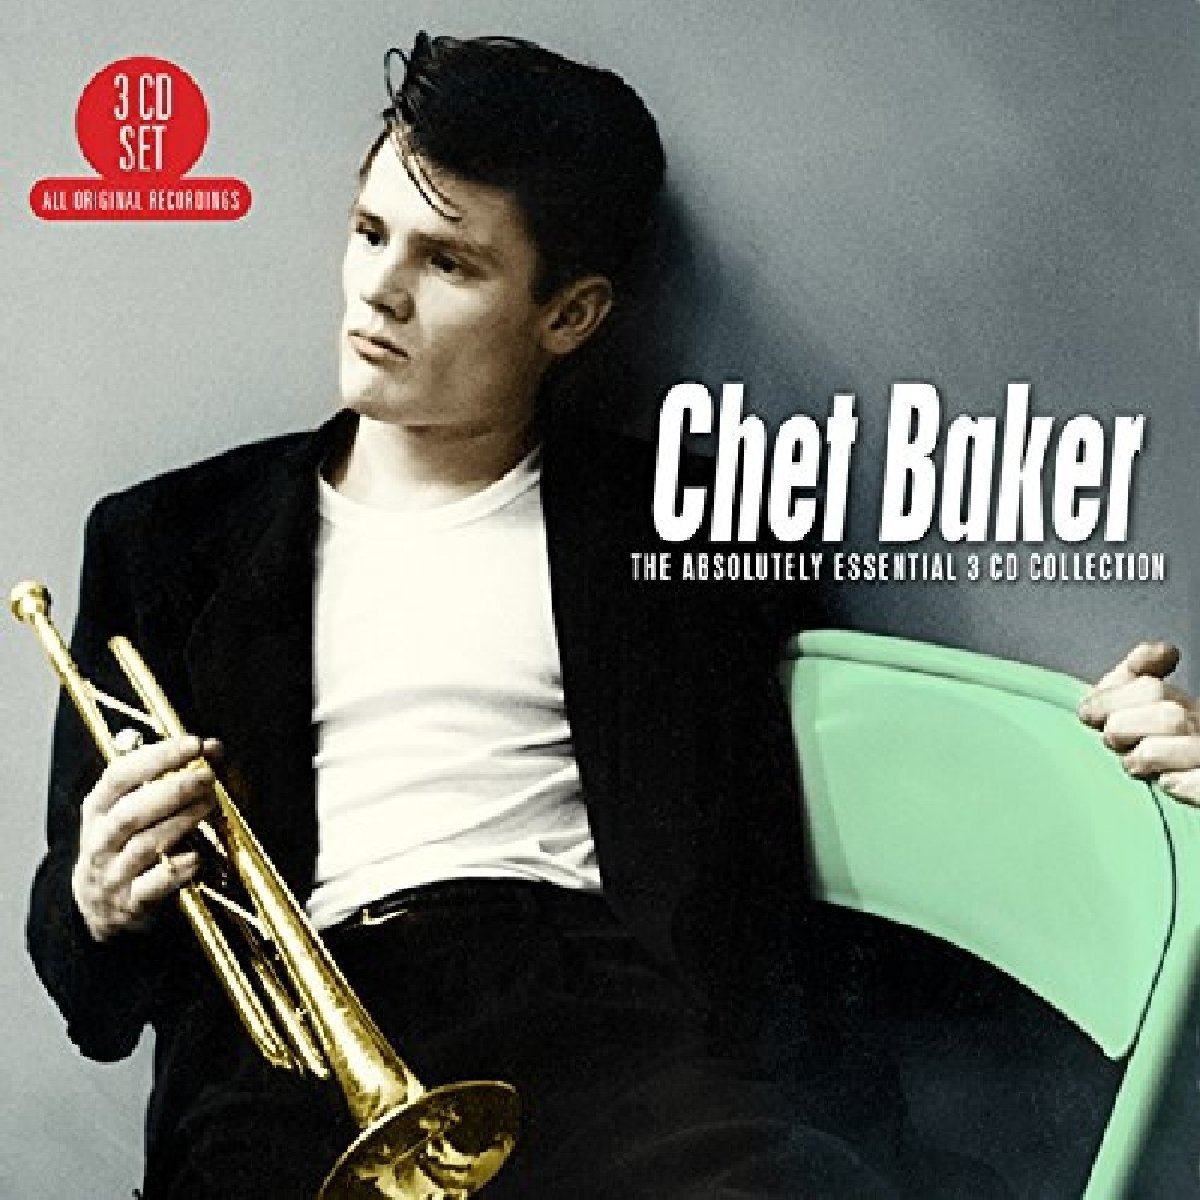 Big 3 The absolutely essential 3 cd collection - chet baker | chet baker